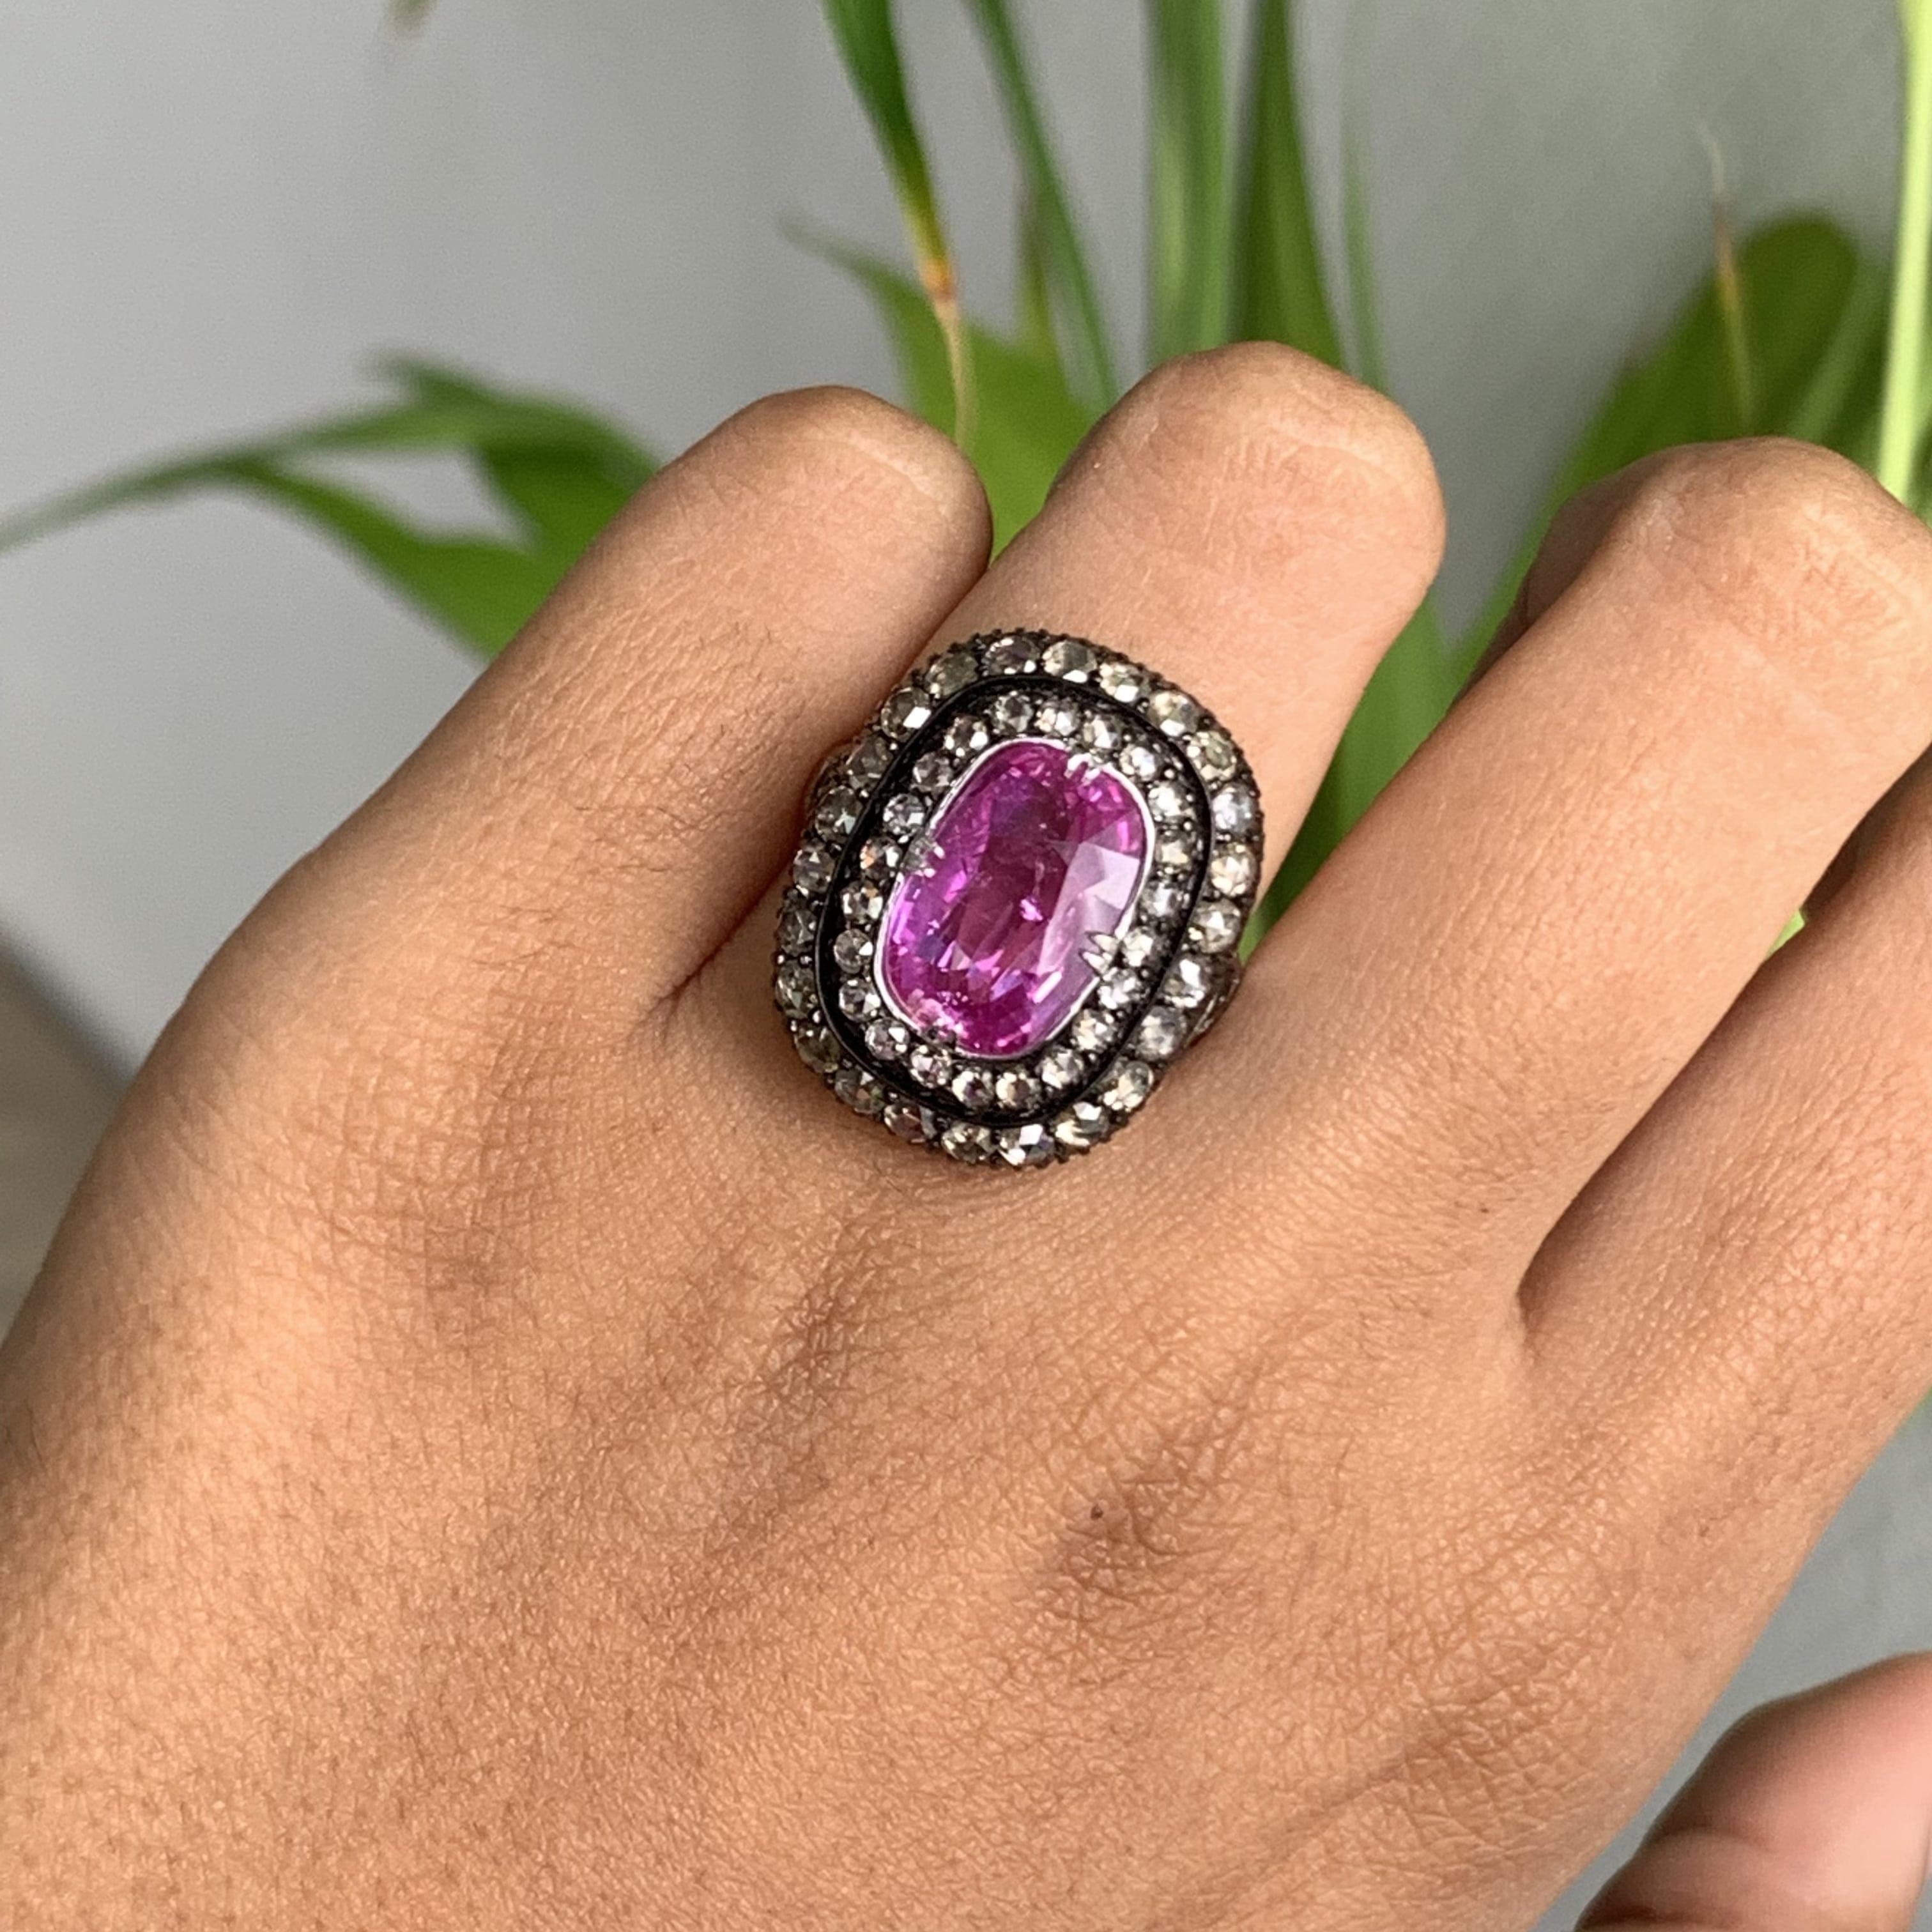 Presenting a remarkable statement ring meticulously handcrafted to evoke a captivating antique aesthetic. This extraordinary piece showcases a 5.03 carat Pink Sapphire, originating from Madagascar, which has only undergone normal heat treatment,